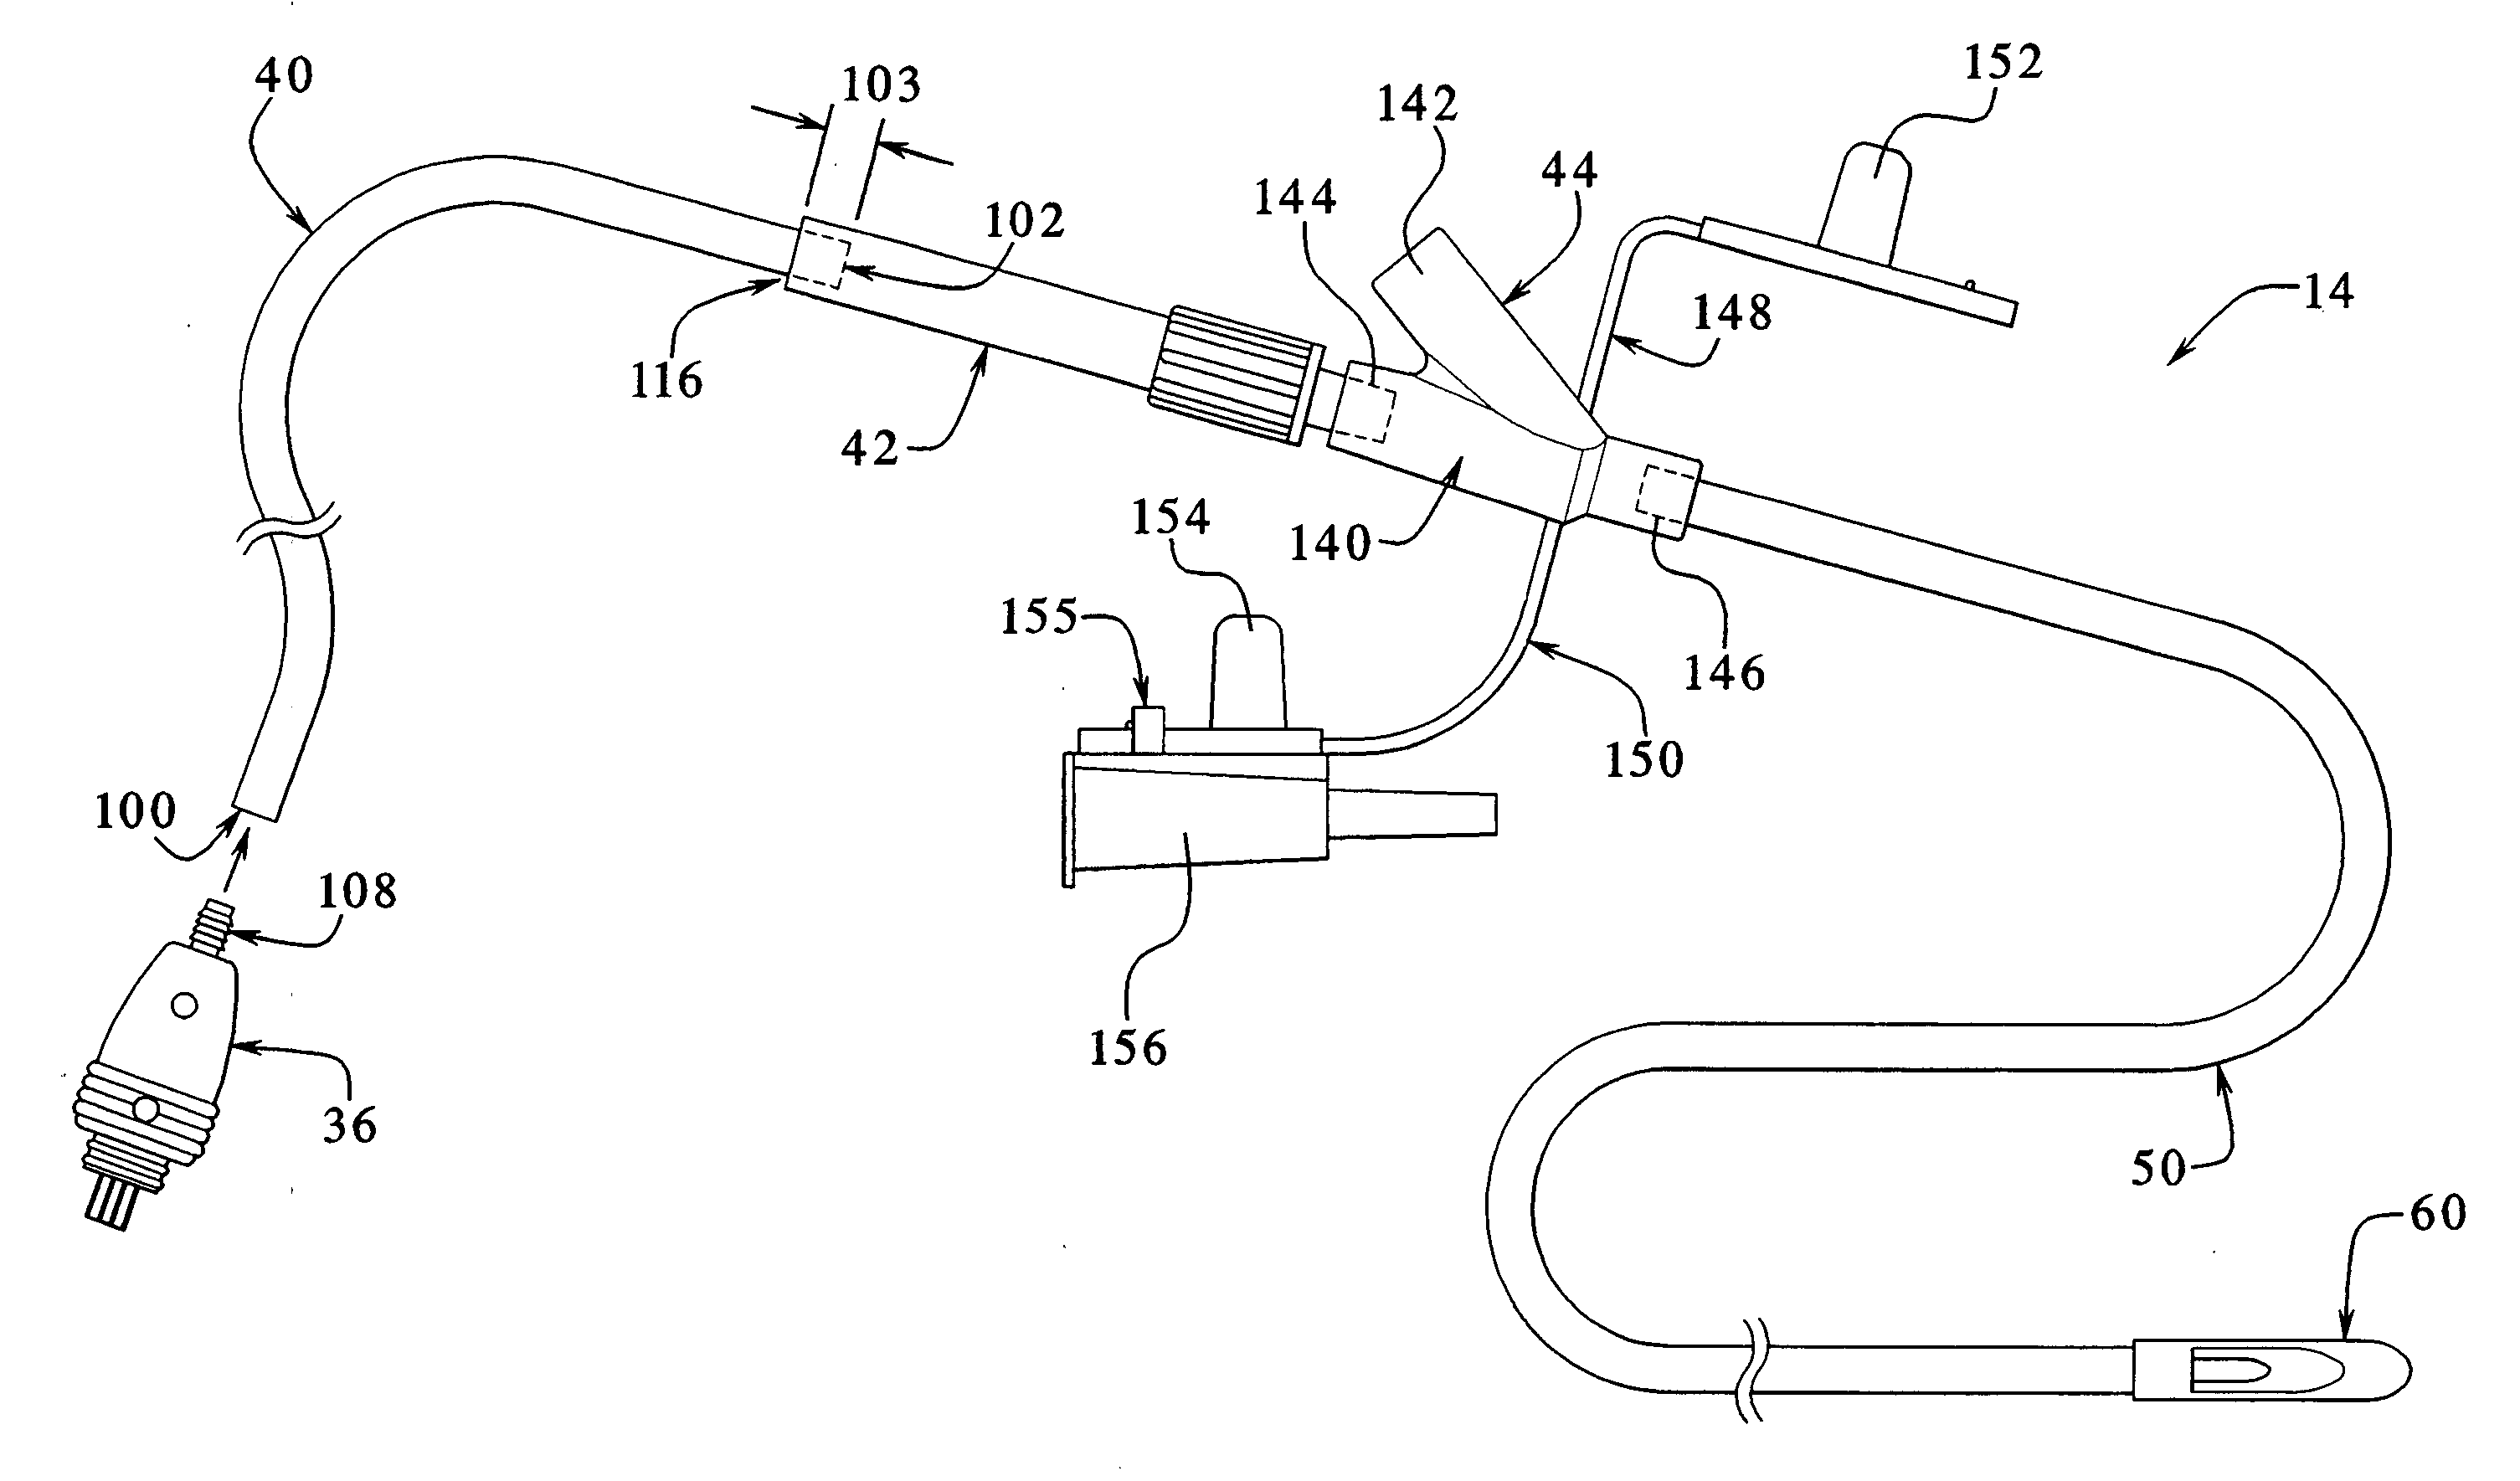 Tubing assembly and signal generator placement control device and method for use with catheter guidance systems